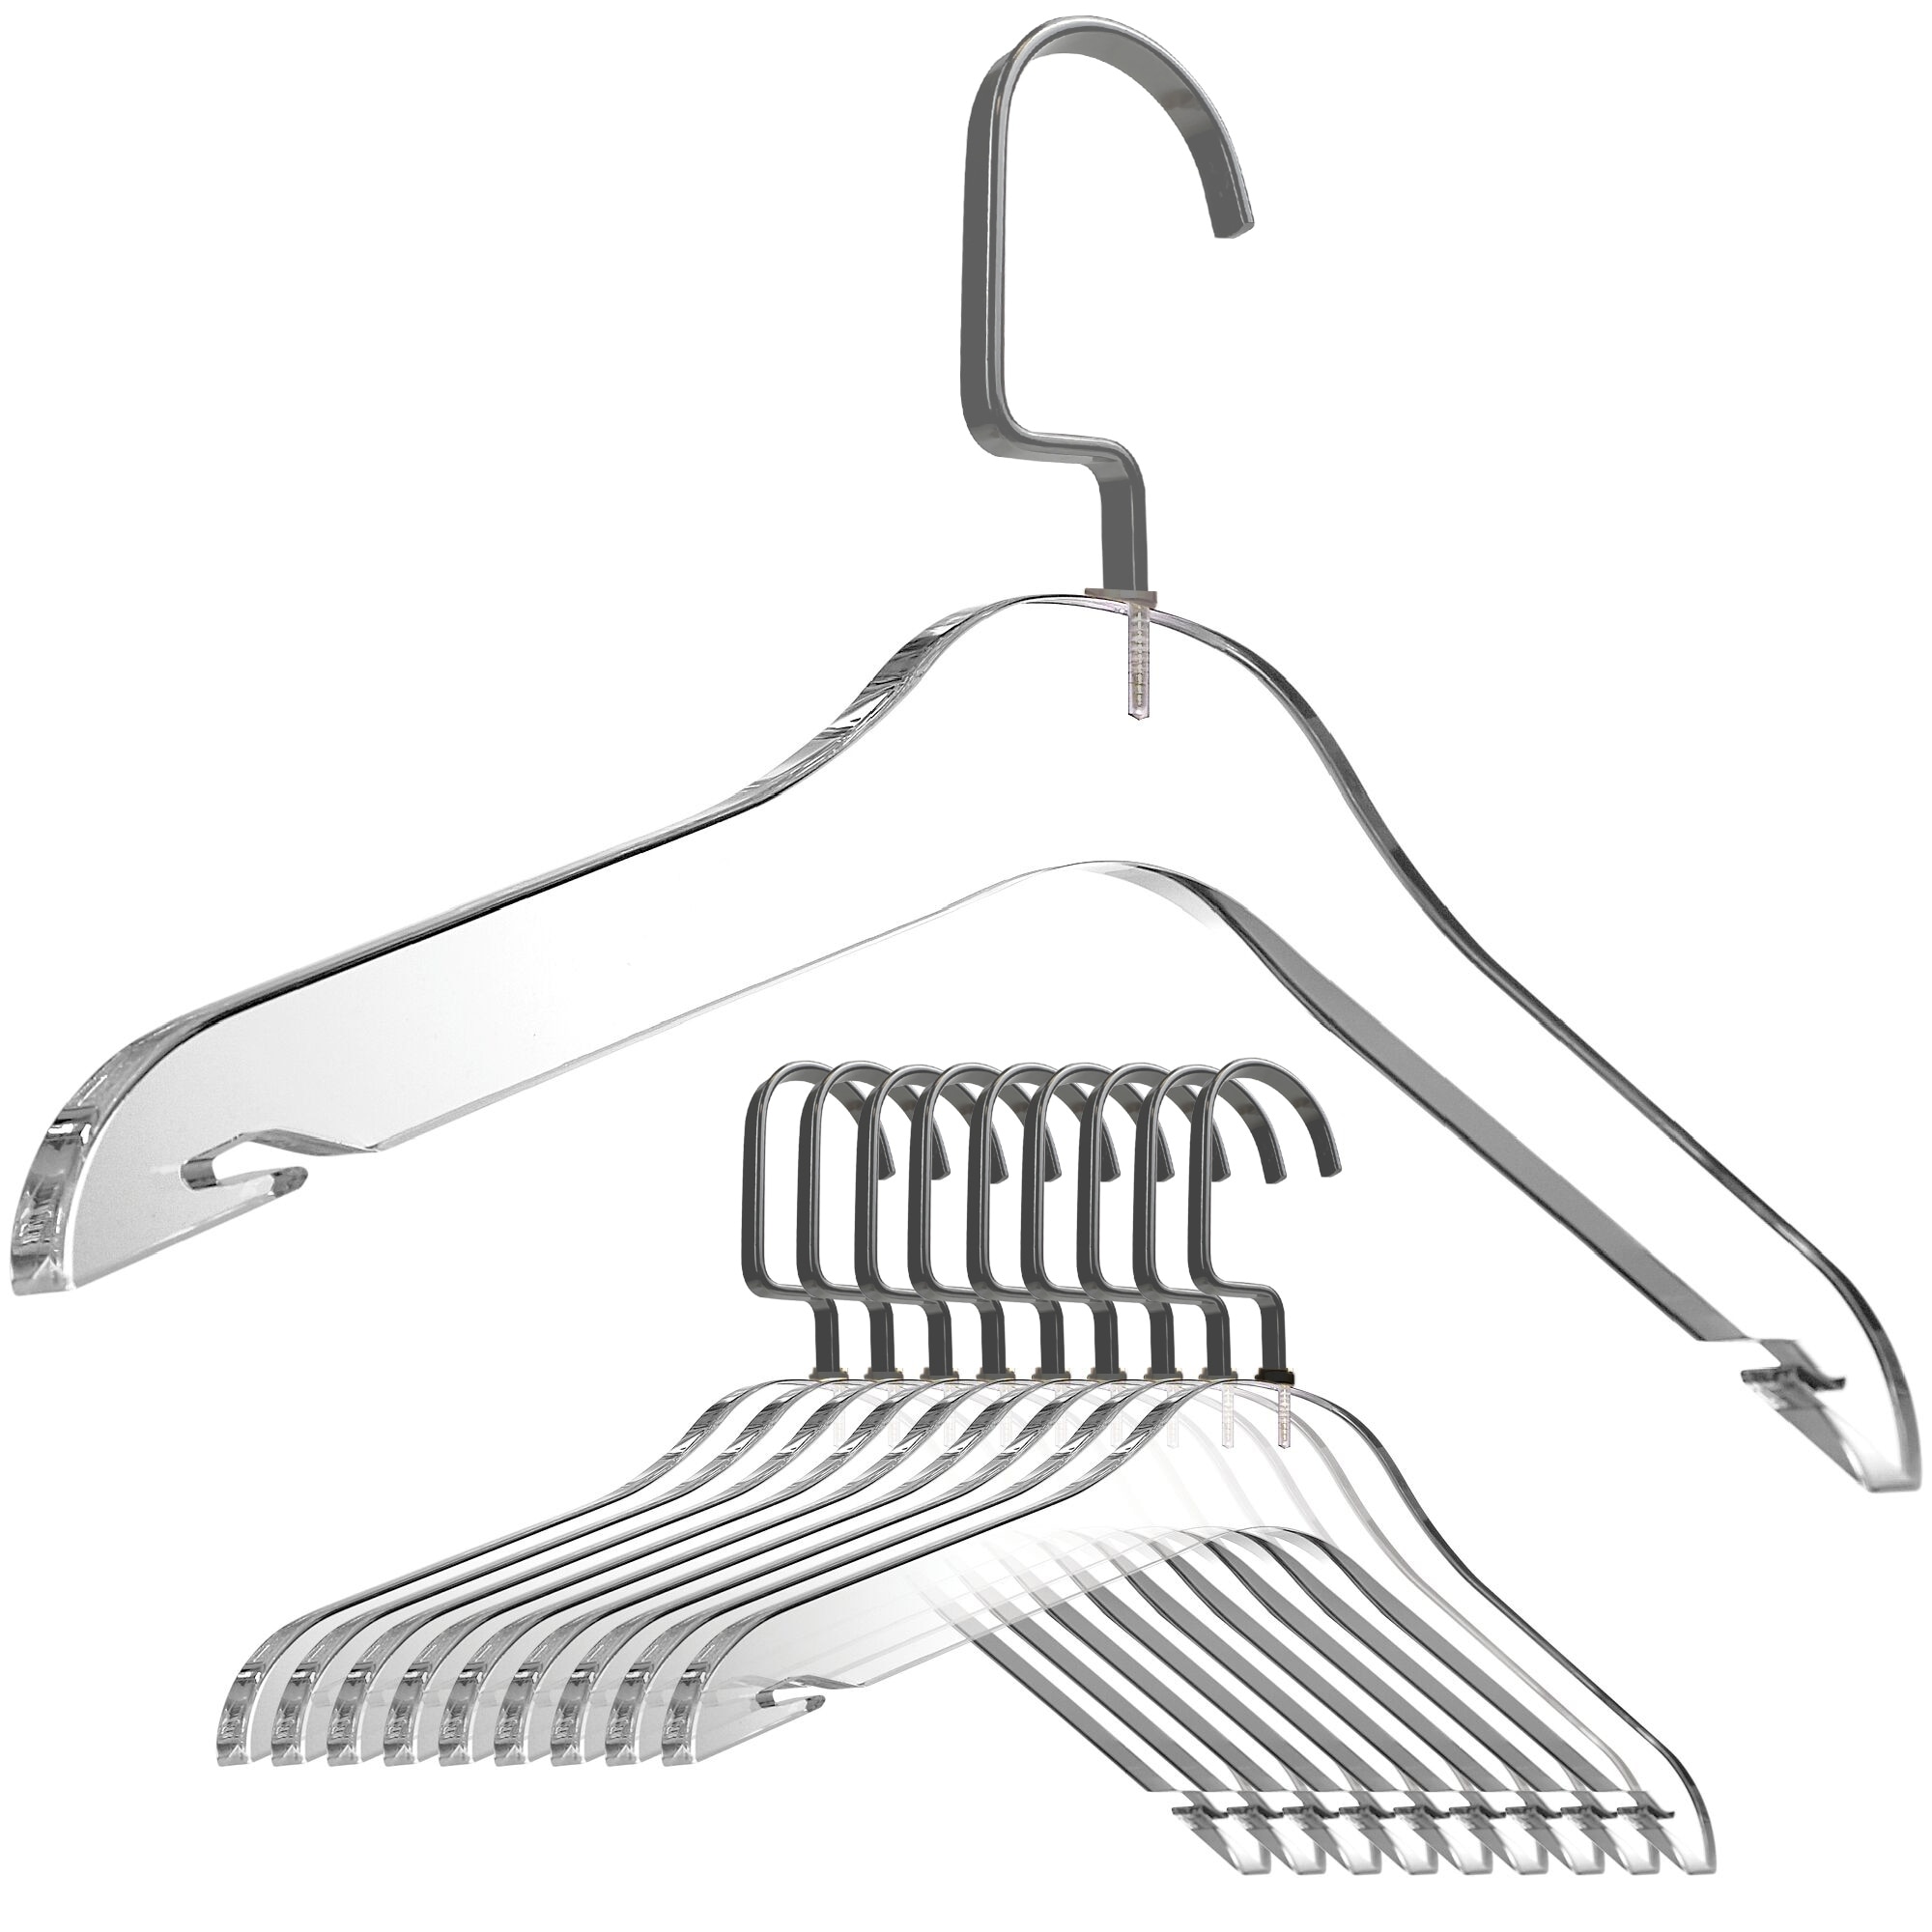 https://ak1.ostkcdn.com/images/products/is/images/direct/24fea1d0a46e1861be1d008f5c8d675cad55bcf2/DesignStyles-Clear-Acrylic-Clothes-Hangers---10-Pk.jpg